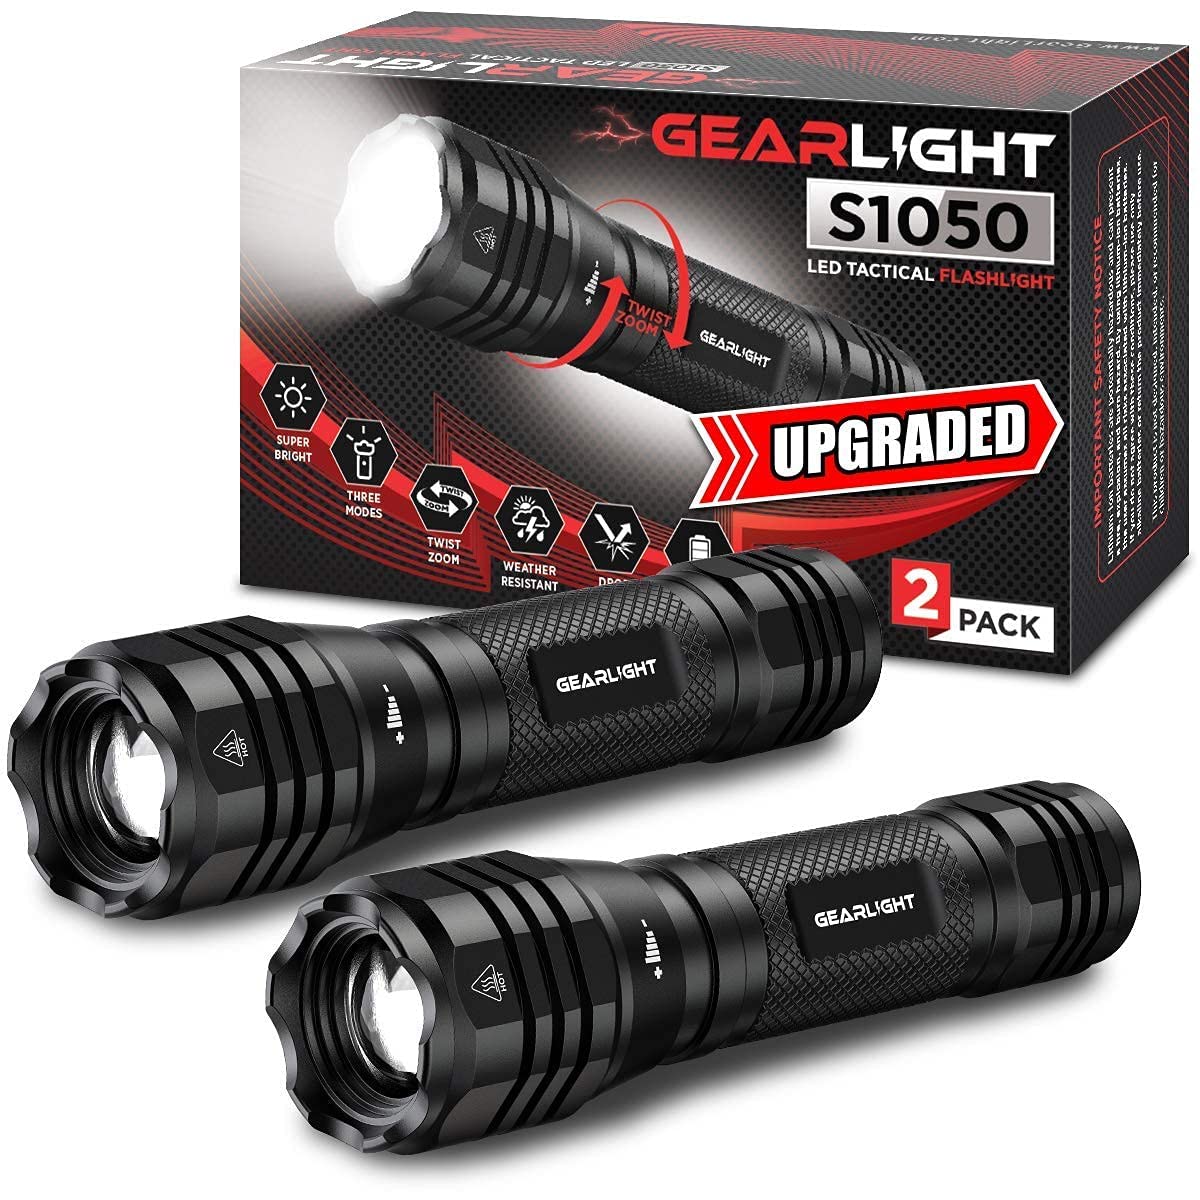 GearLight S500 LED Headlamp [2 Pack] + GearLight S1050 LED Tactical Flashlight [2 Pack]